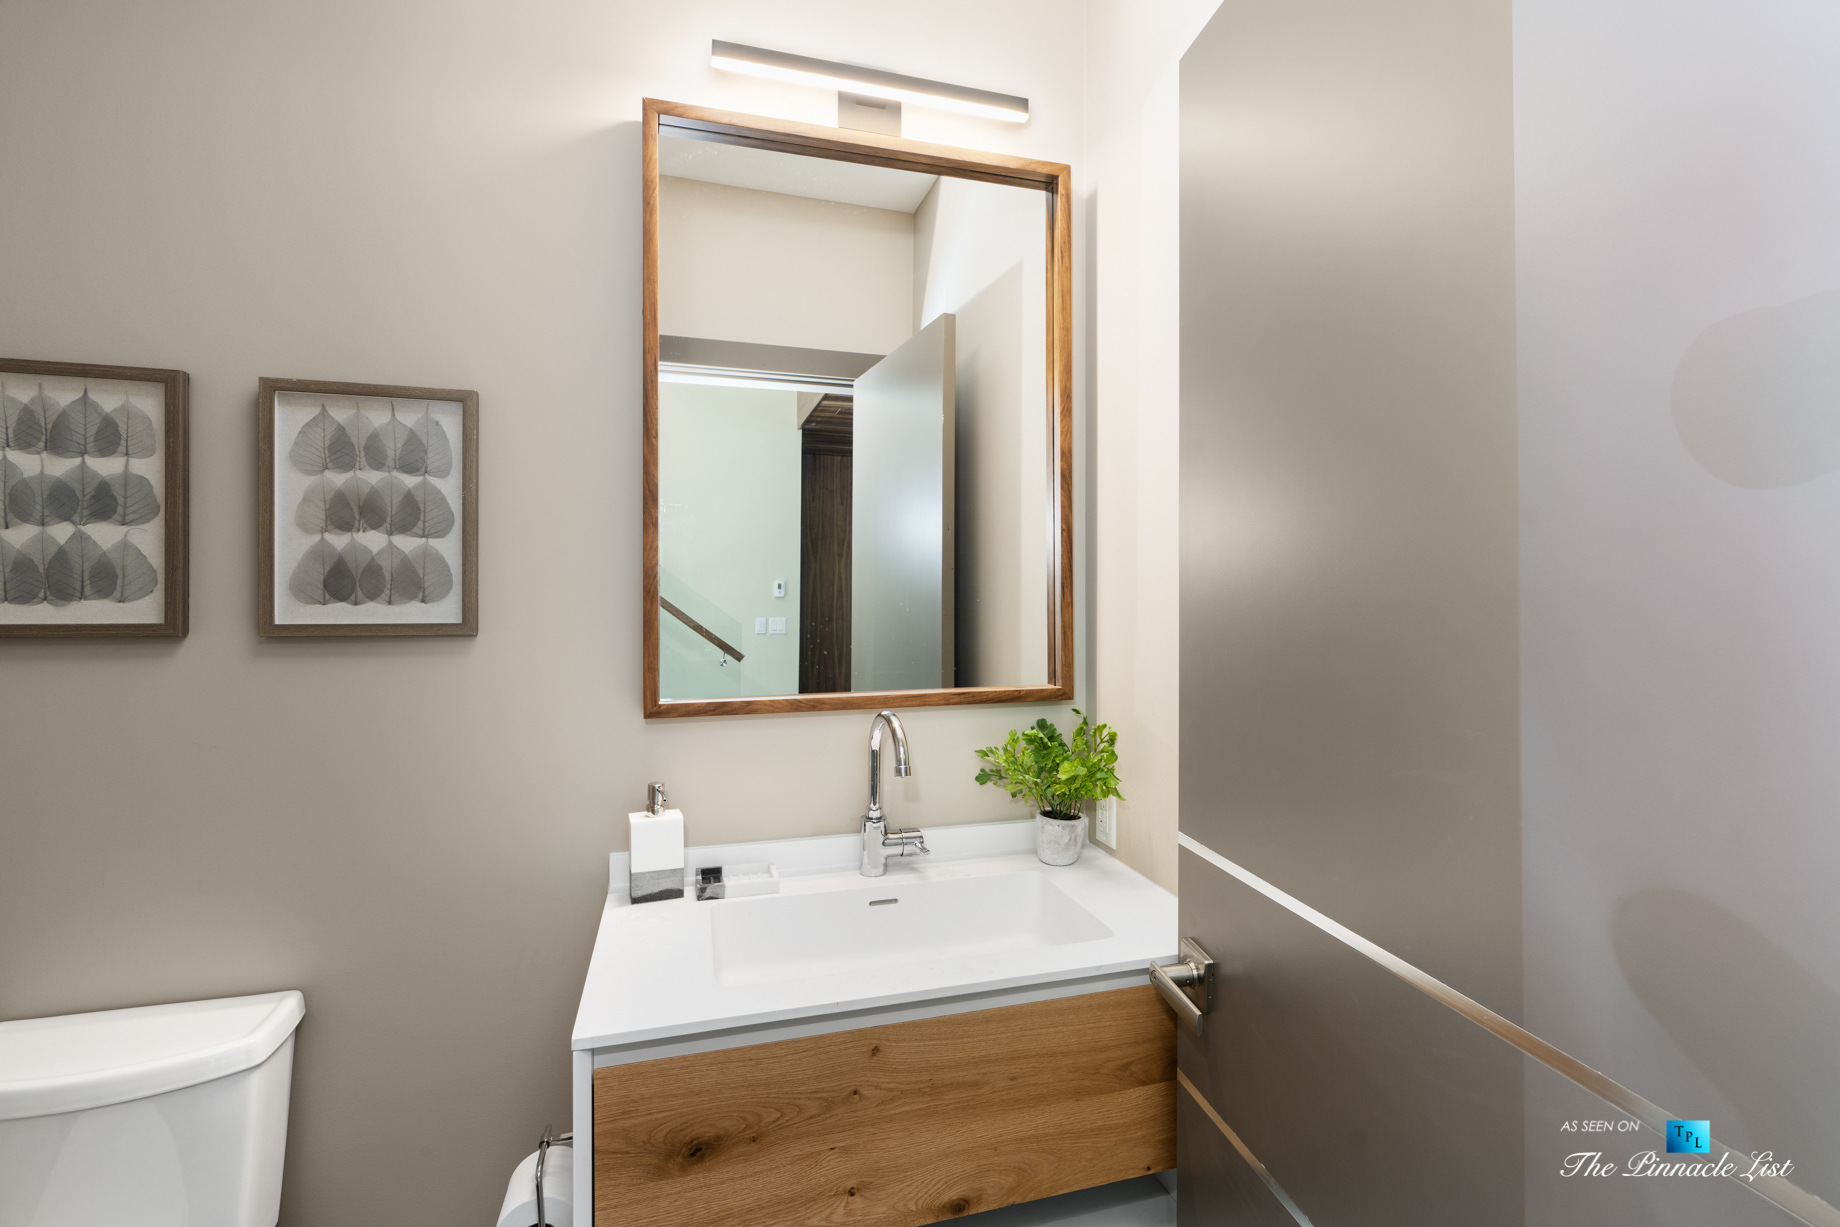 3350 Watson Rd, Belcarra, BC, Canada - Vancouver Luxury Real Estate - Modern Home Washroom